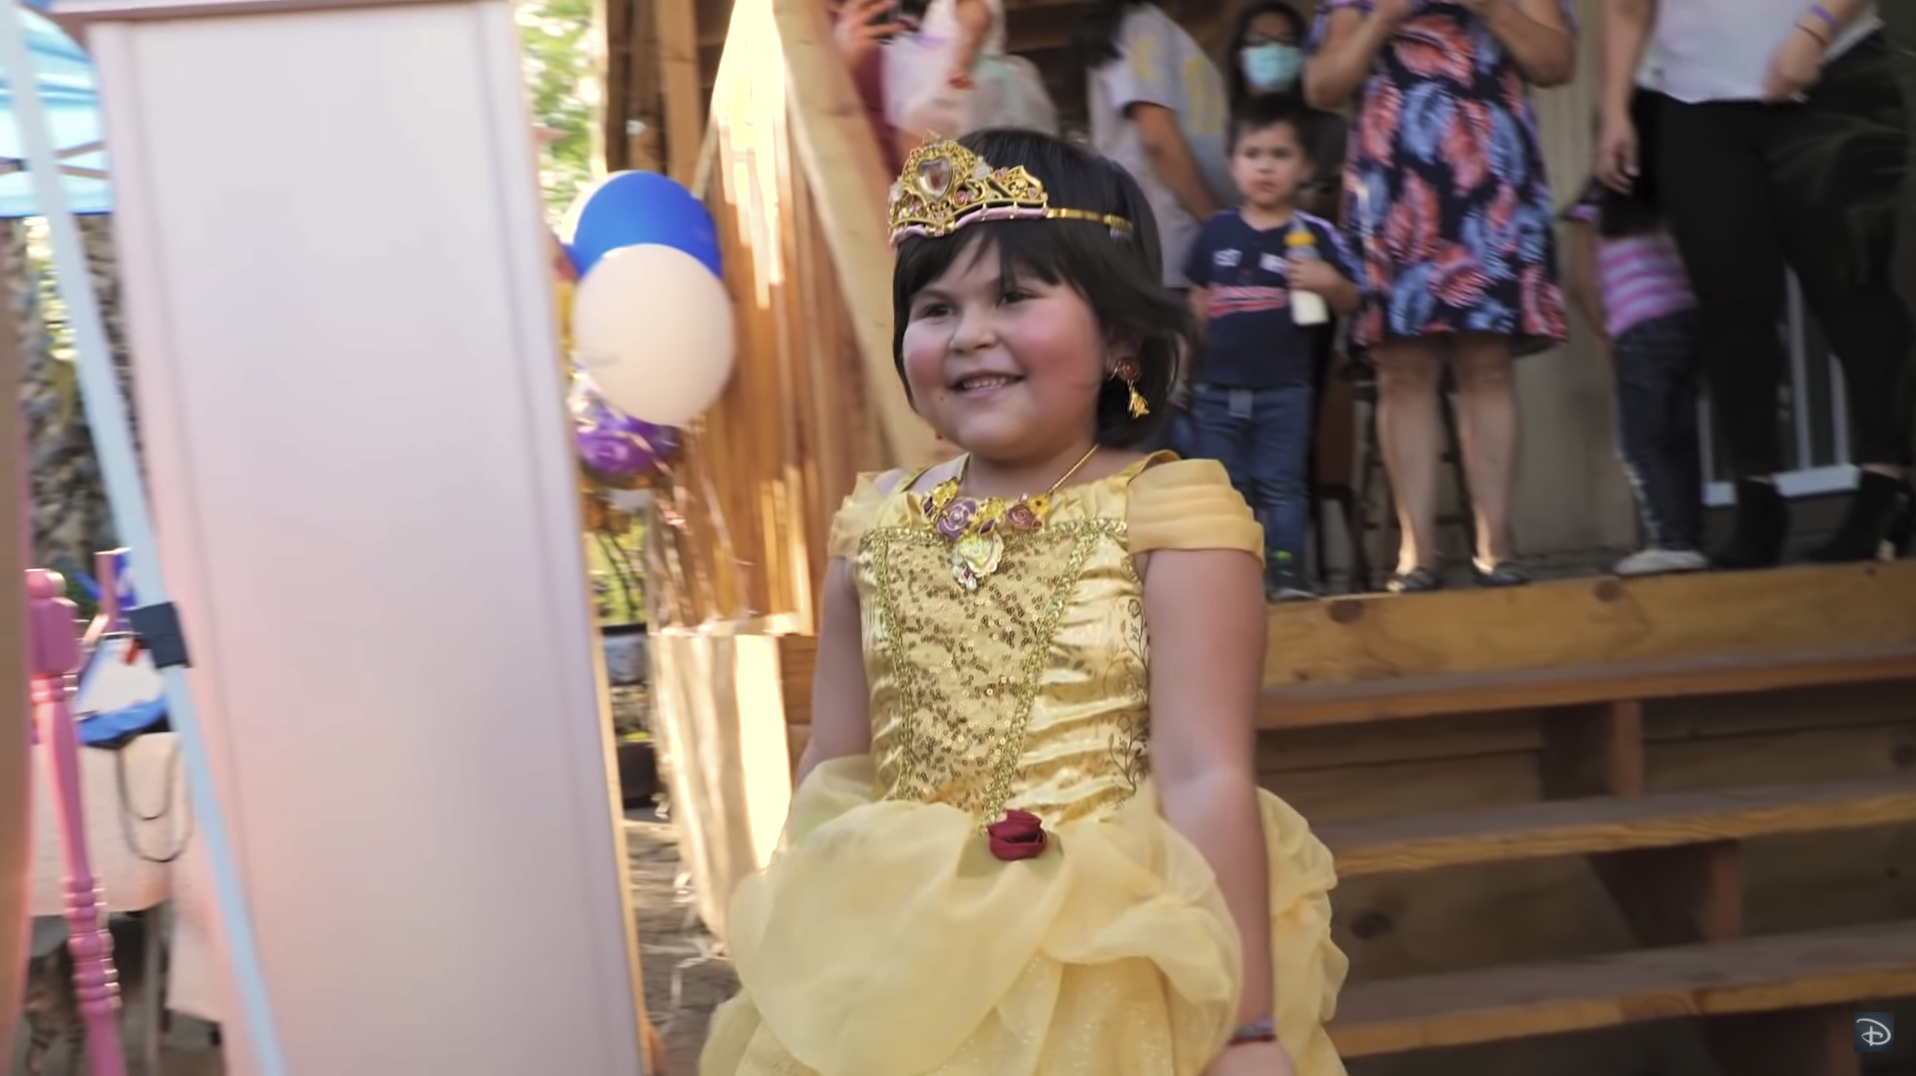 Maria dressed in a replica Princess Belle ballroom gown.